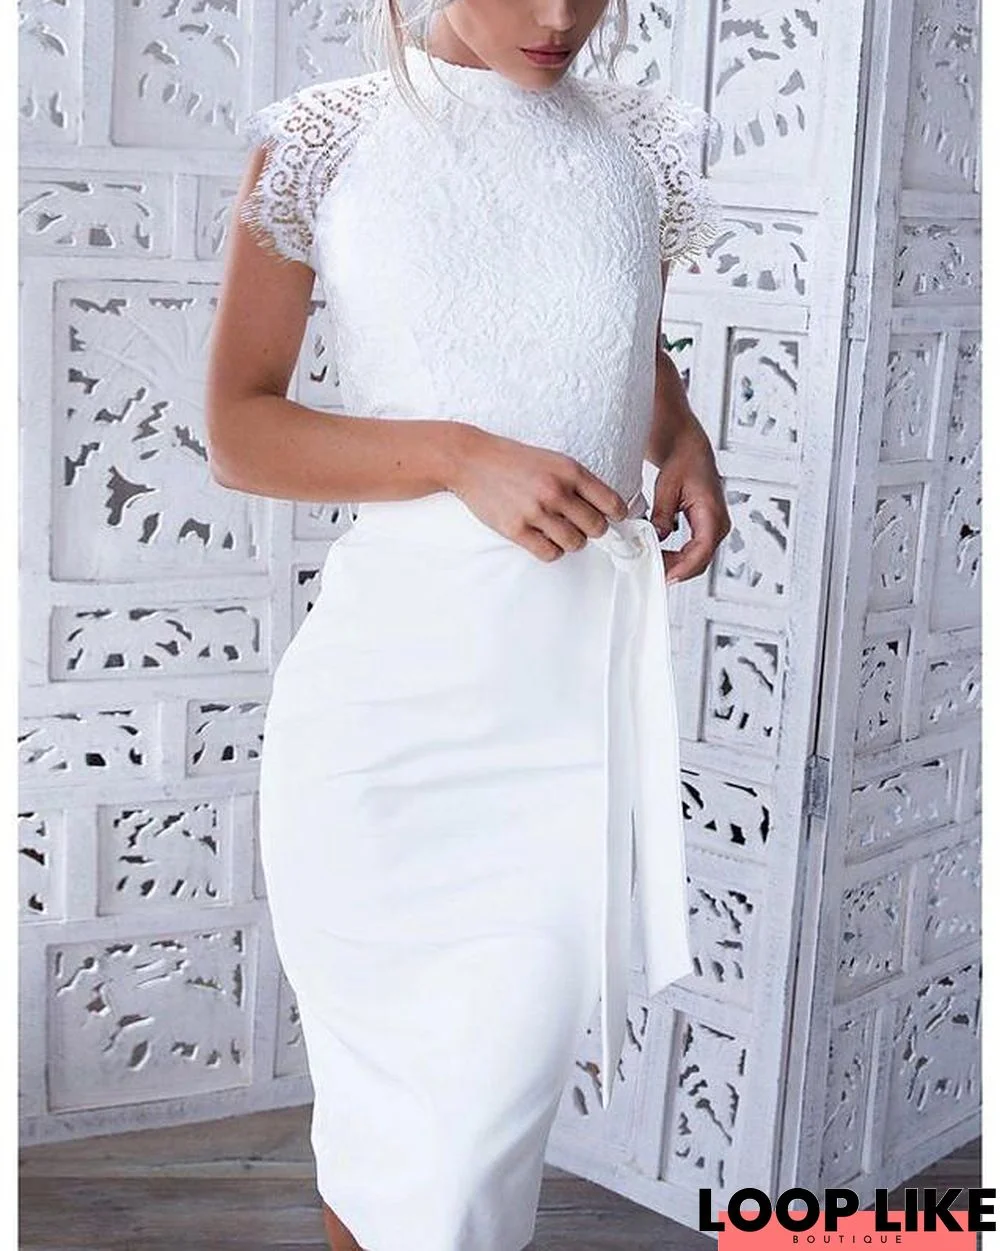 Women's Bodycon Knee Length Dress Sleeveless Solid Color Lace Up Bow Hot Elegant Lace White Dresses